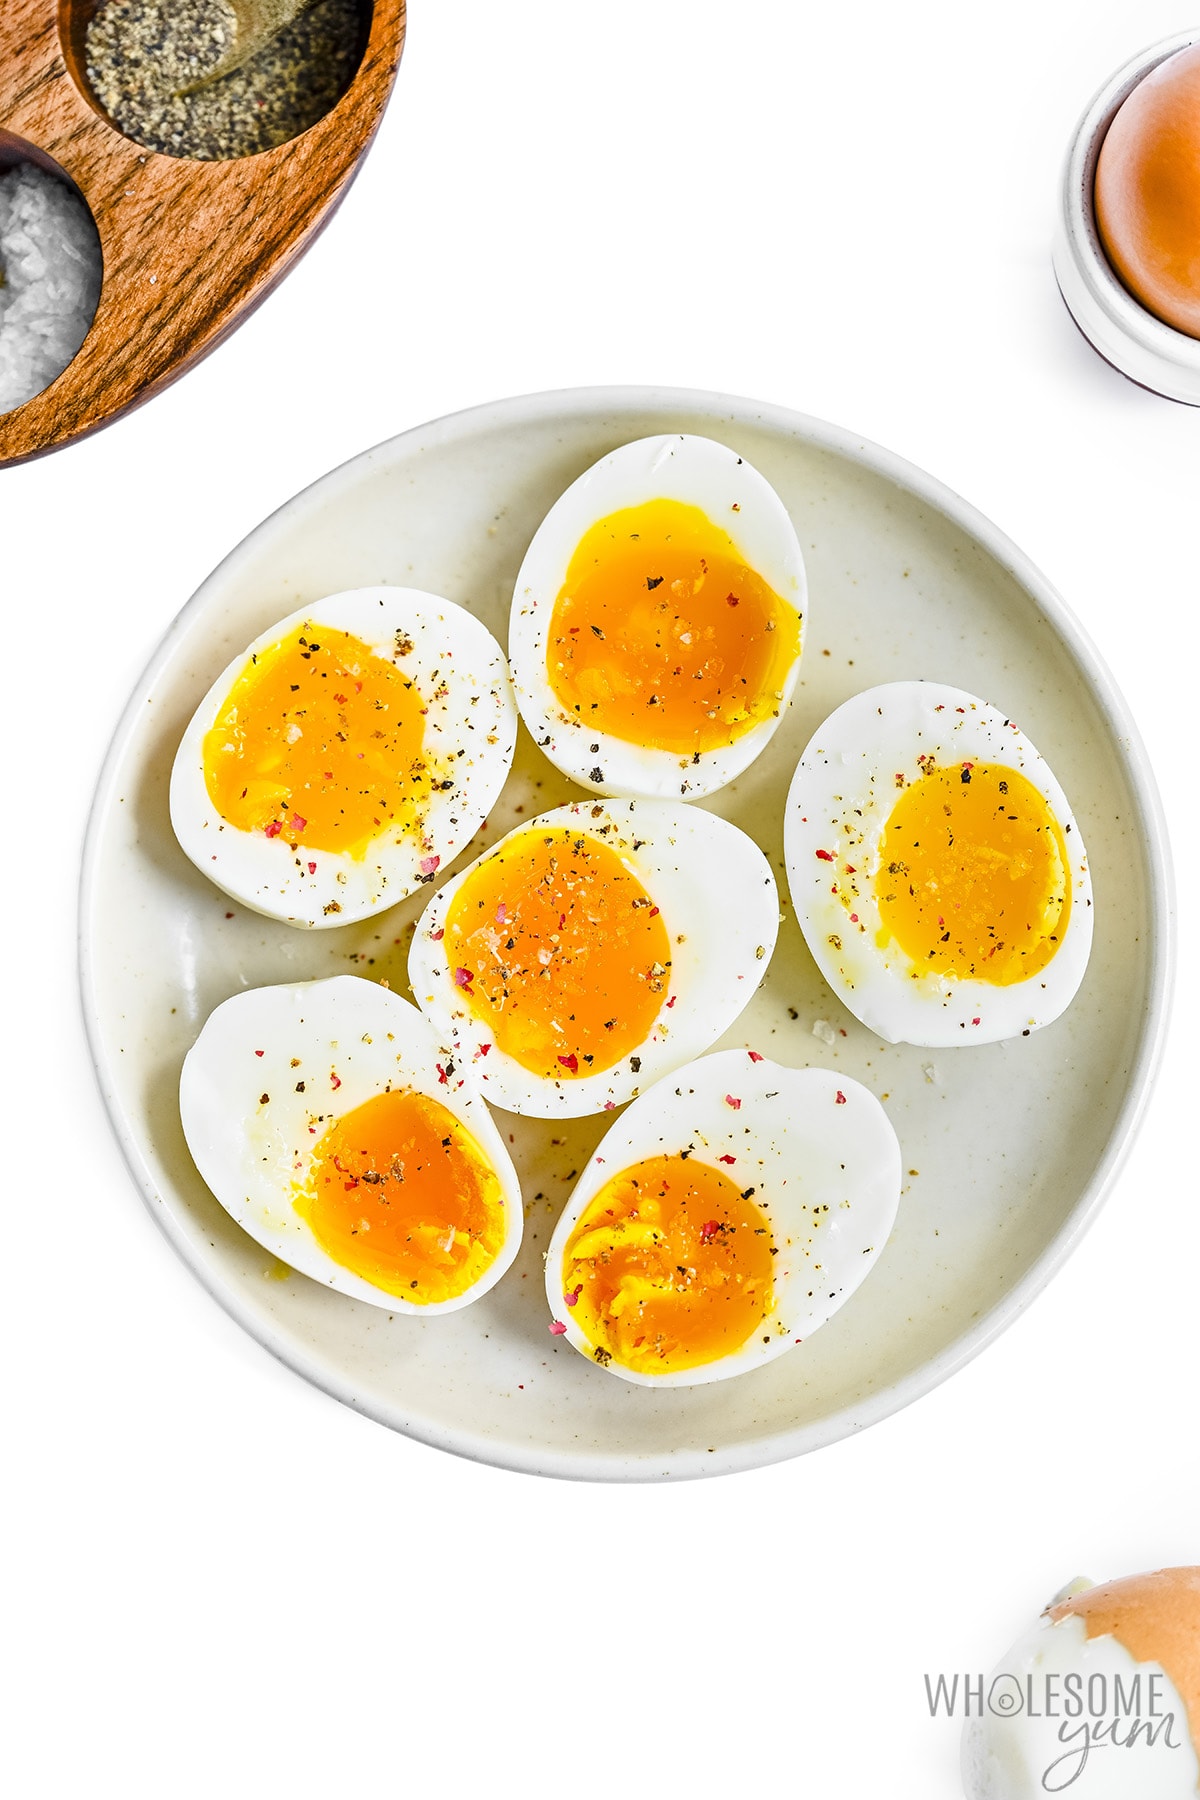 Perfect soft boiled eggs cut in half on a plate.